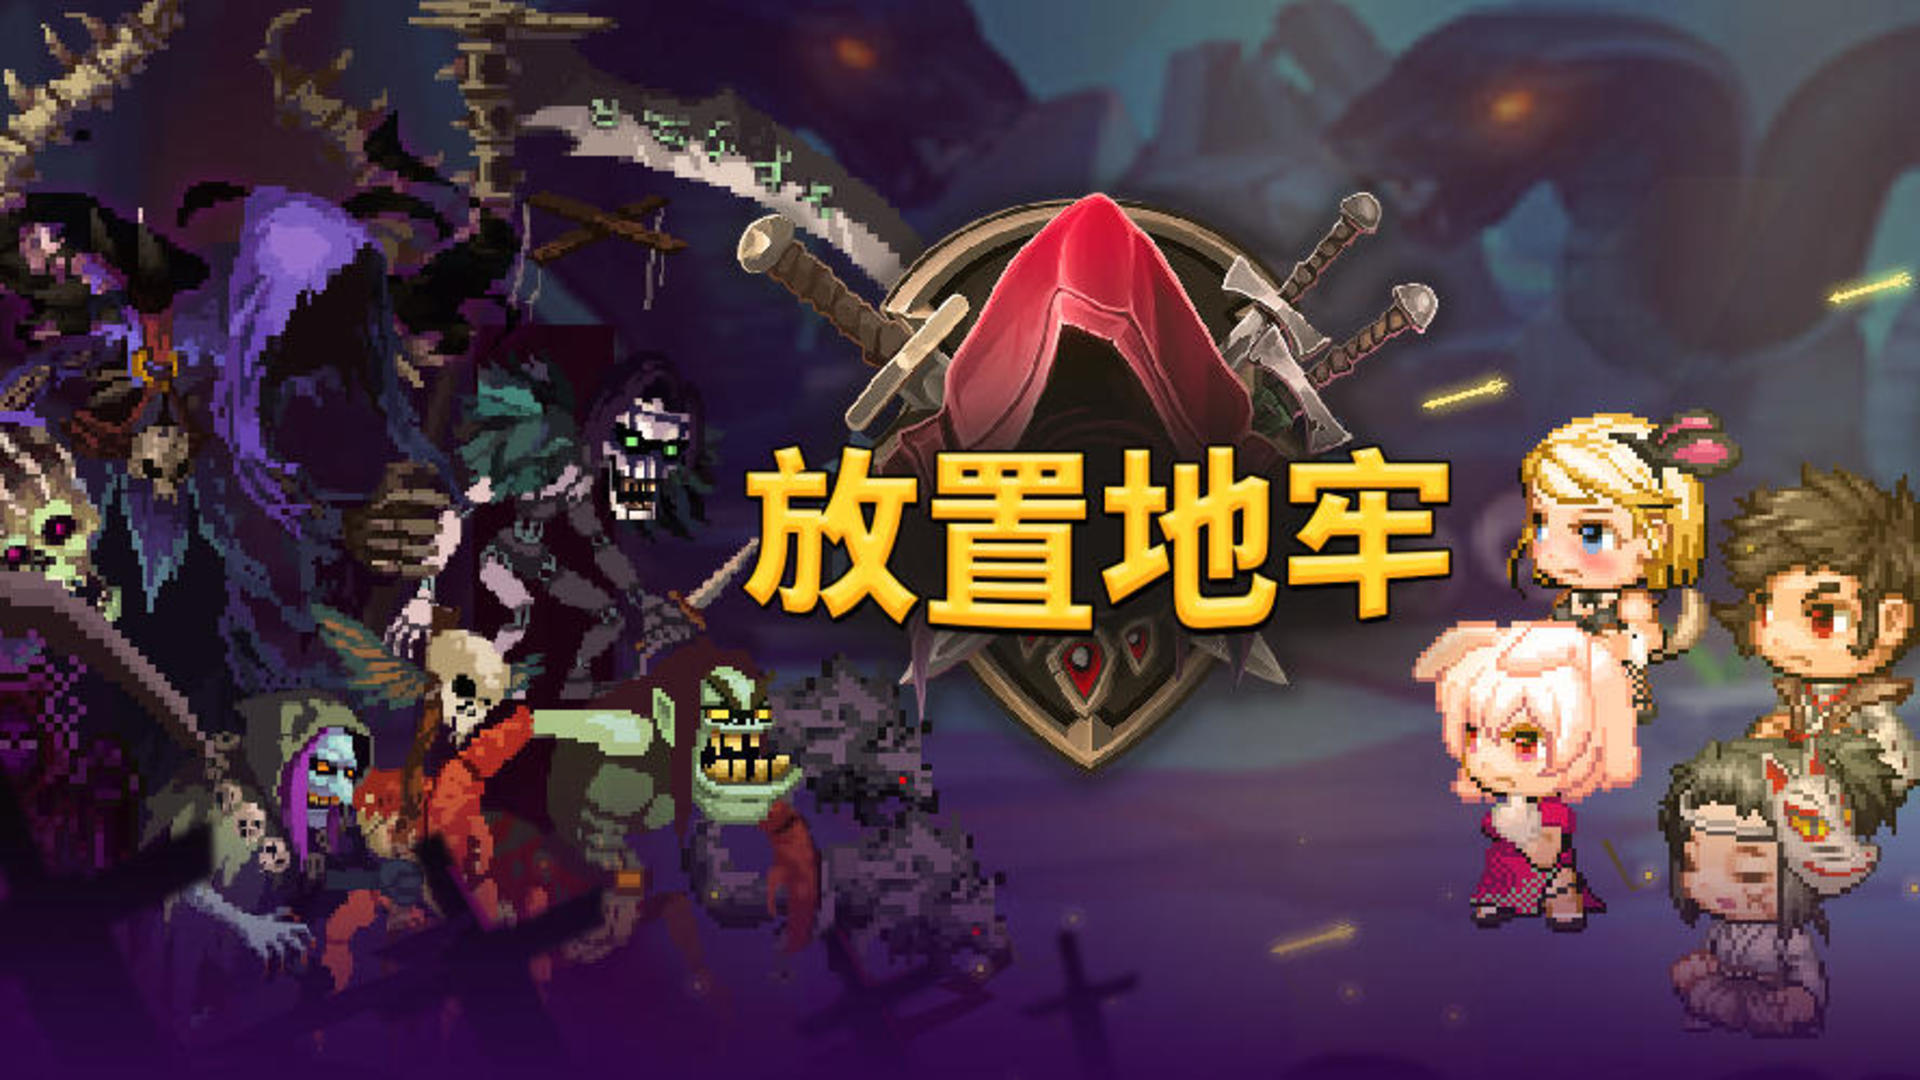 Banner of Placement Dungeon (စမ်းသပ်ဆာဗာ) 1.0.1